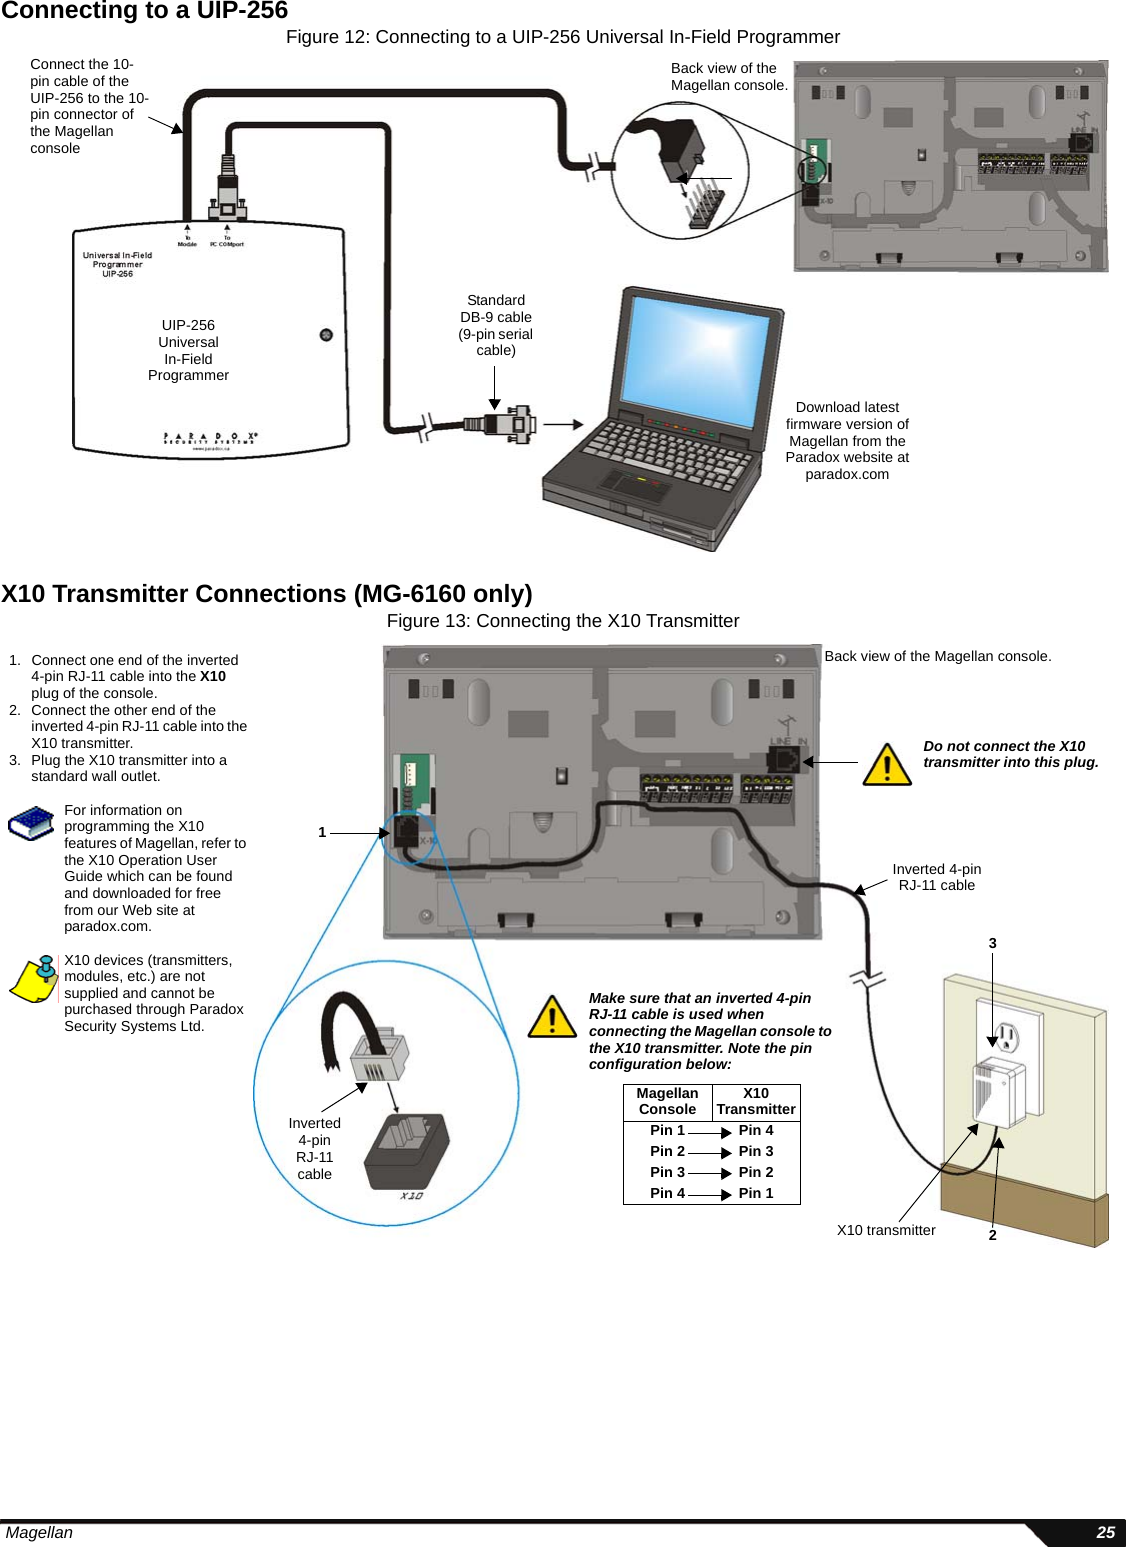  Magellan 25Connecting to a UIP-256Figure 12: Connecting to a UIP-256 Universal In-Field ProgrammerX10 Transmitter Connections (MG-6160 only)Figure 13: Connecting the X10 TransmitterBack view of the Magellan console.Standard DB-9 cable (9-pin serial cable)Connect the 10-pin cable of the UIP-256 to the 10-pin connector of the Magellan consoleDownload latest firmware version of Magellan from the Paradox website at paradox.comUIP-256Universal In-Field ProgrammerBack view of the Magellan console.Inverted4-pinRJ-11cableX10 transmitter1. Connect one end of the inverted 4-pin RJ-11 cable into the X10 plug of the console.2. Connect the other end of the inverted 4-pin RJ-11 cable into the X10 transmitter.3. Plug the X10 transmitter into a standard wall outlet.123Do not connect the X10 transmitter into this plug.Inverted 4-pin RJ-11 cableFor information on programming the X10 features of Magellan, refer to the X10 Operation User Guide which can be found and downloaded for free from our Web site at paradox.com.Make sure that an inverted 4-pin RJ-11 cable is used when connecting the Magellan console to the X10 transmitter. Note the pin configuration below:Magellan Console X10 TransmitterPin 1 Pin 4Pin 2 Pin 3Pin 3 Pin 2Pin 4 Pin 1X10 devices (transmitters, modules, etc.) are not supplied and cannot be purchased through Paradox Security Systems Ltd.